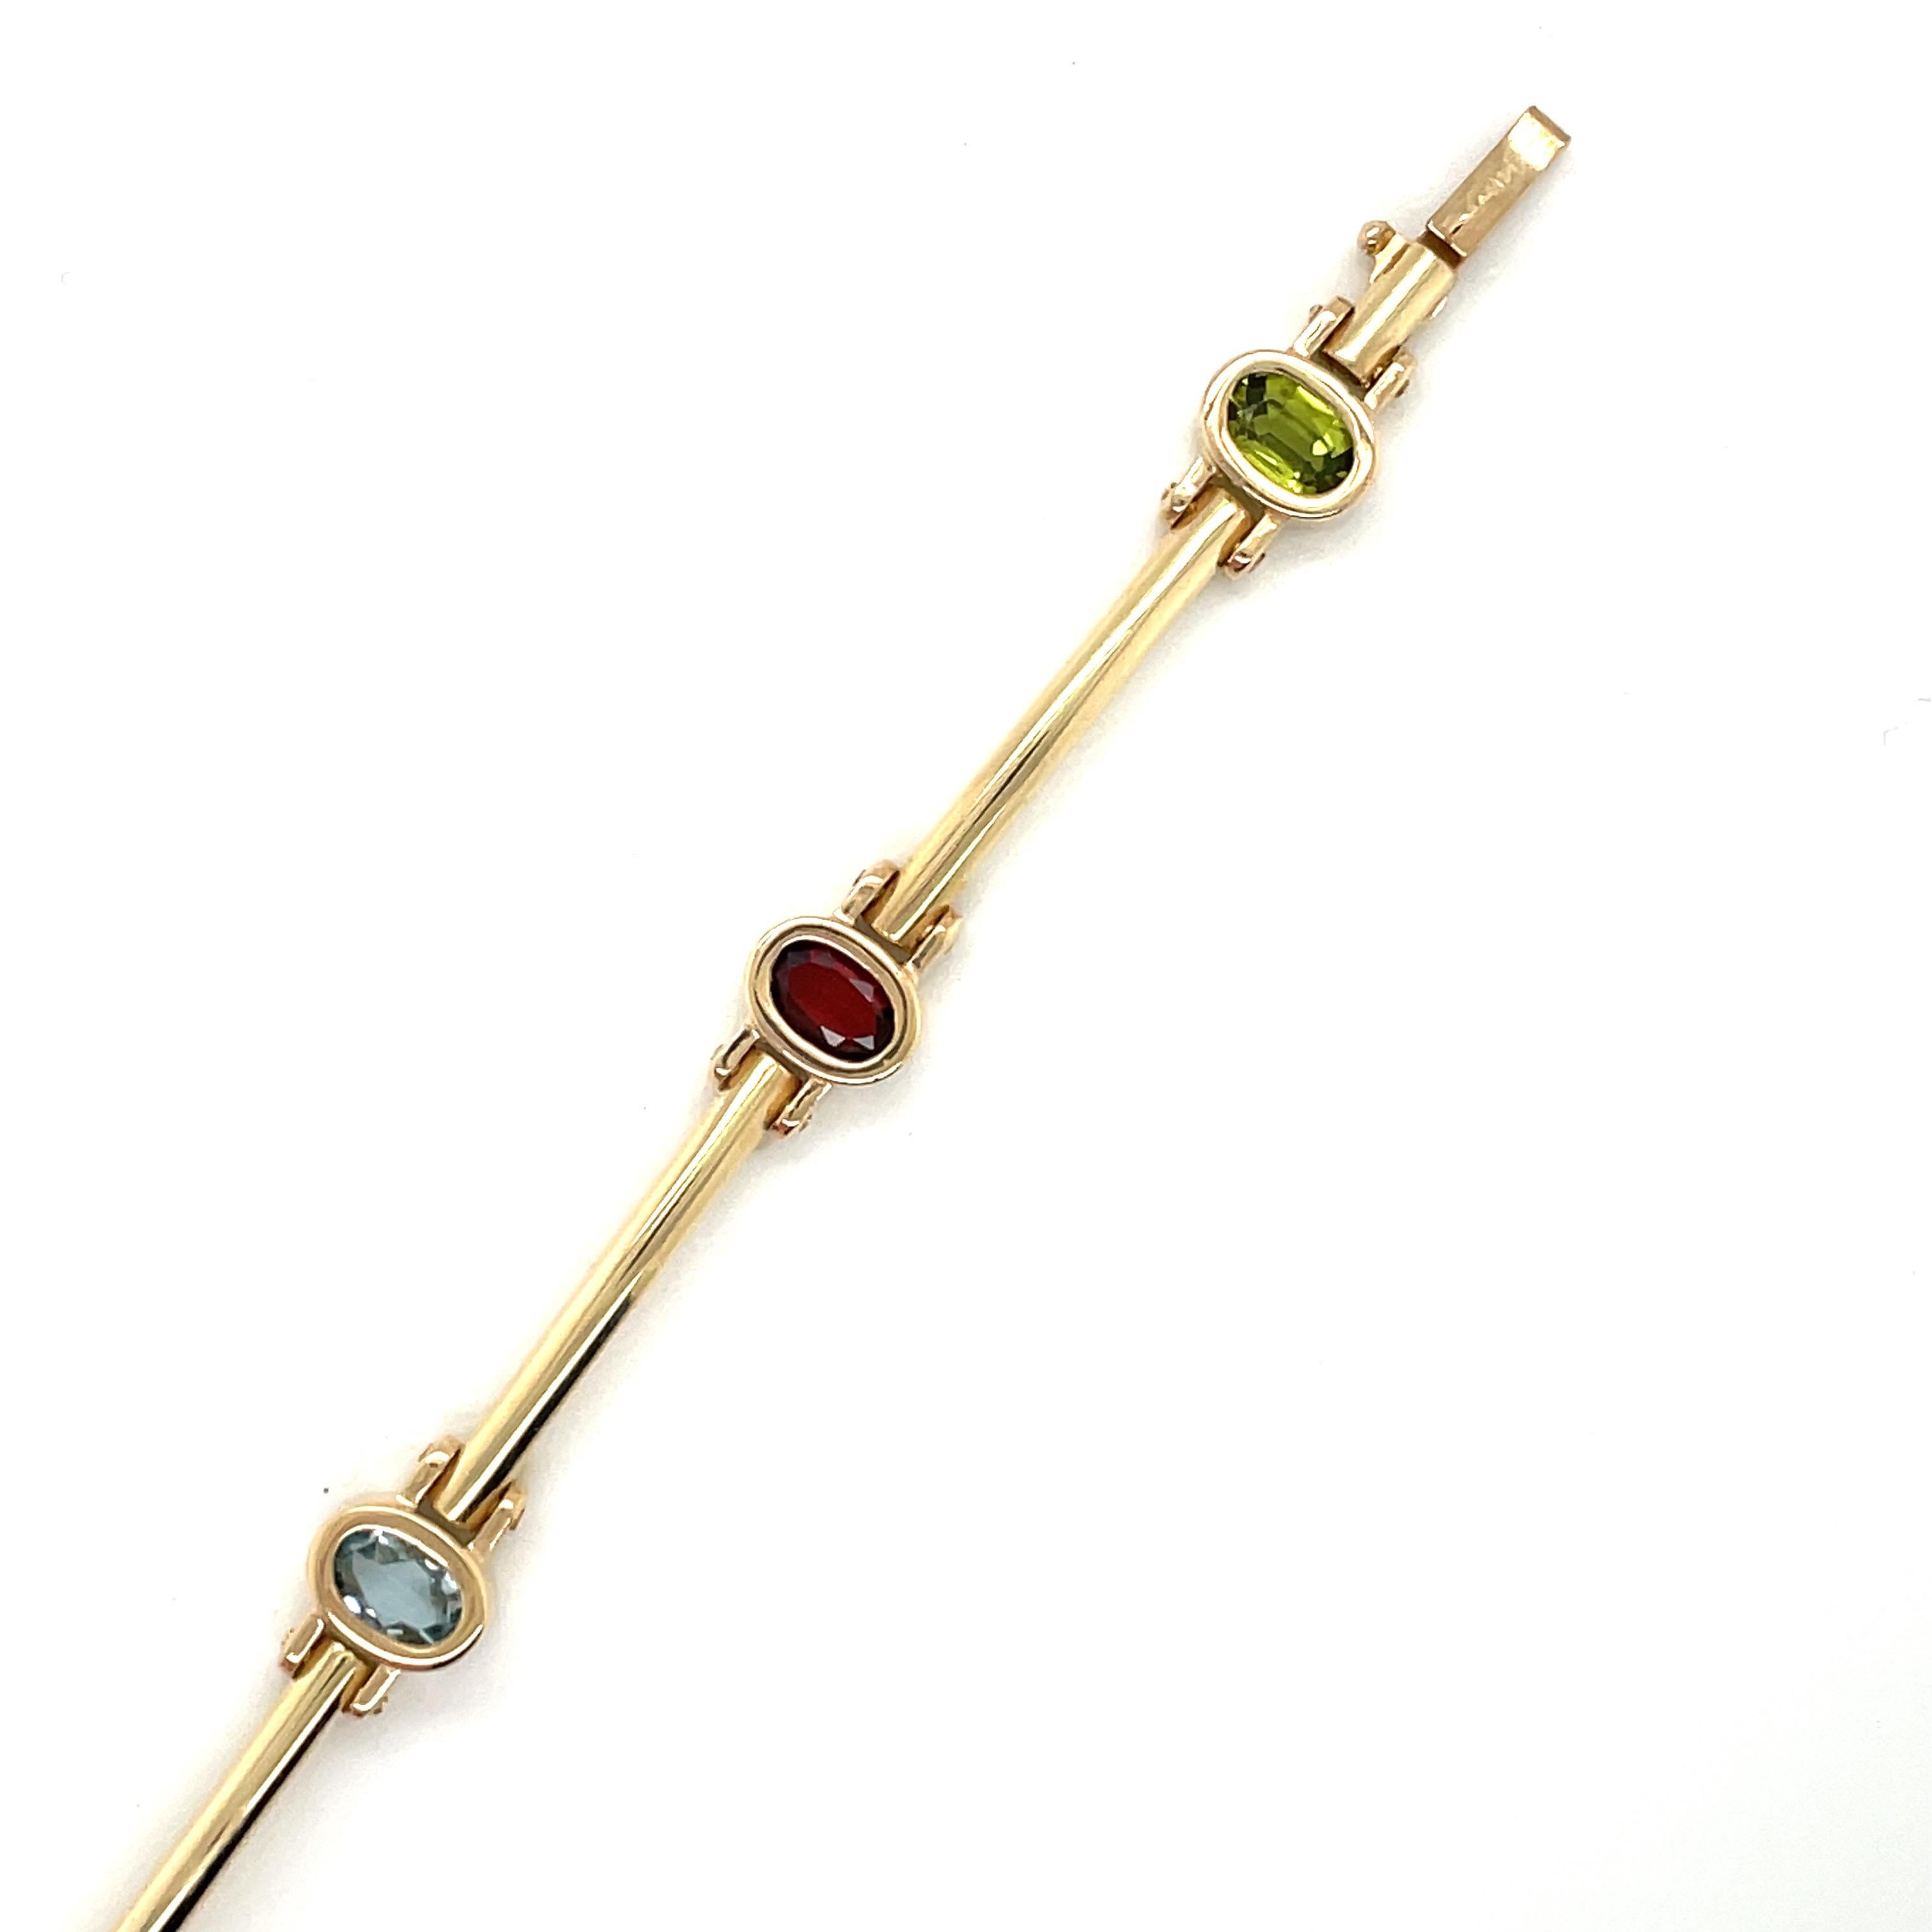 Vintage Mulit Color Semi Precious Gemstone Bezel and Bar Link Bracelet In Good Condition For Sale In Boston, MA